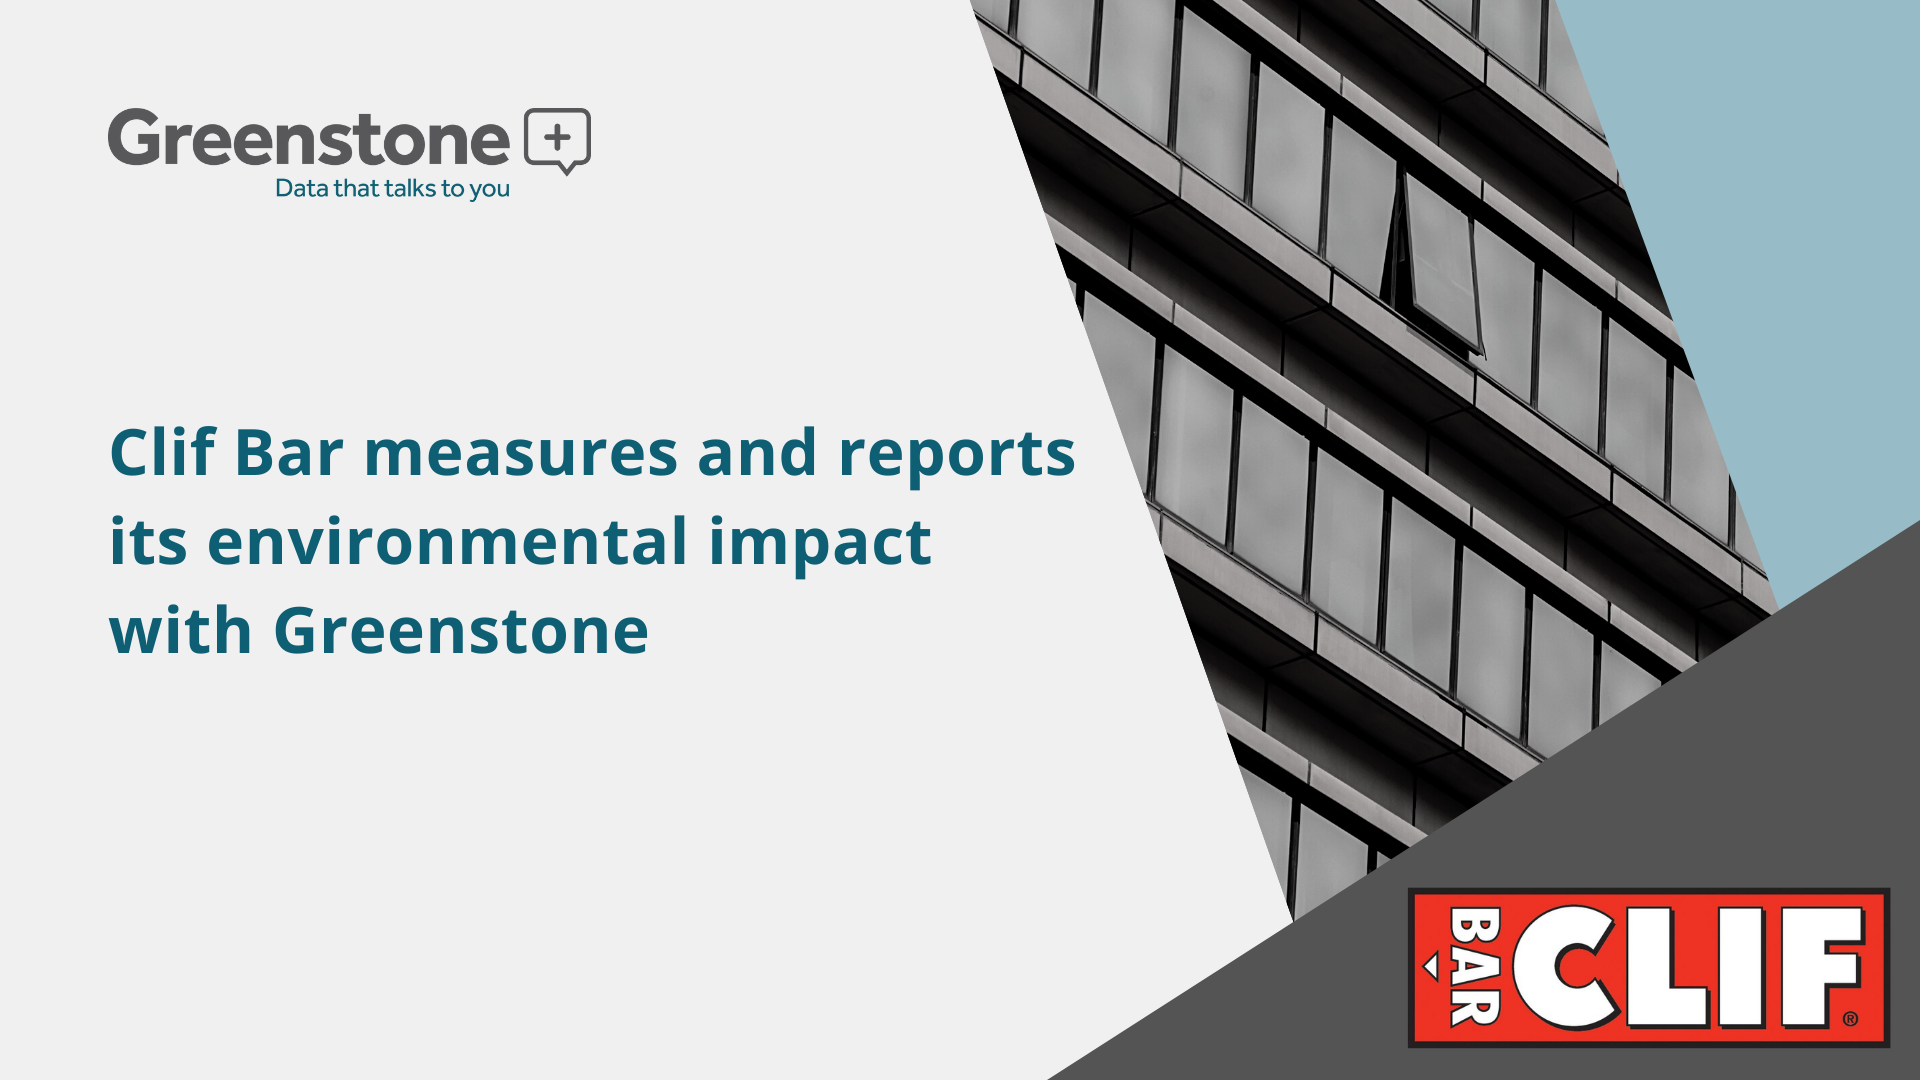 Clif Bar measures and reports its environmental impact with Greenstone